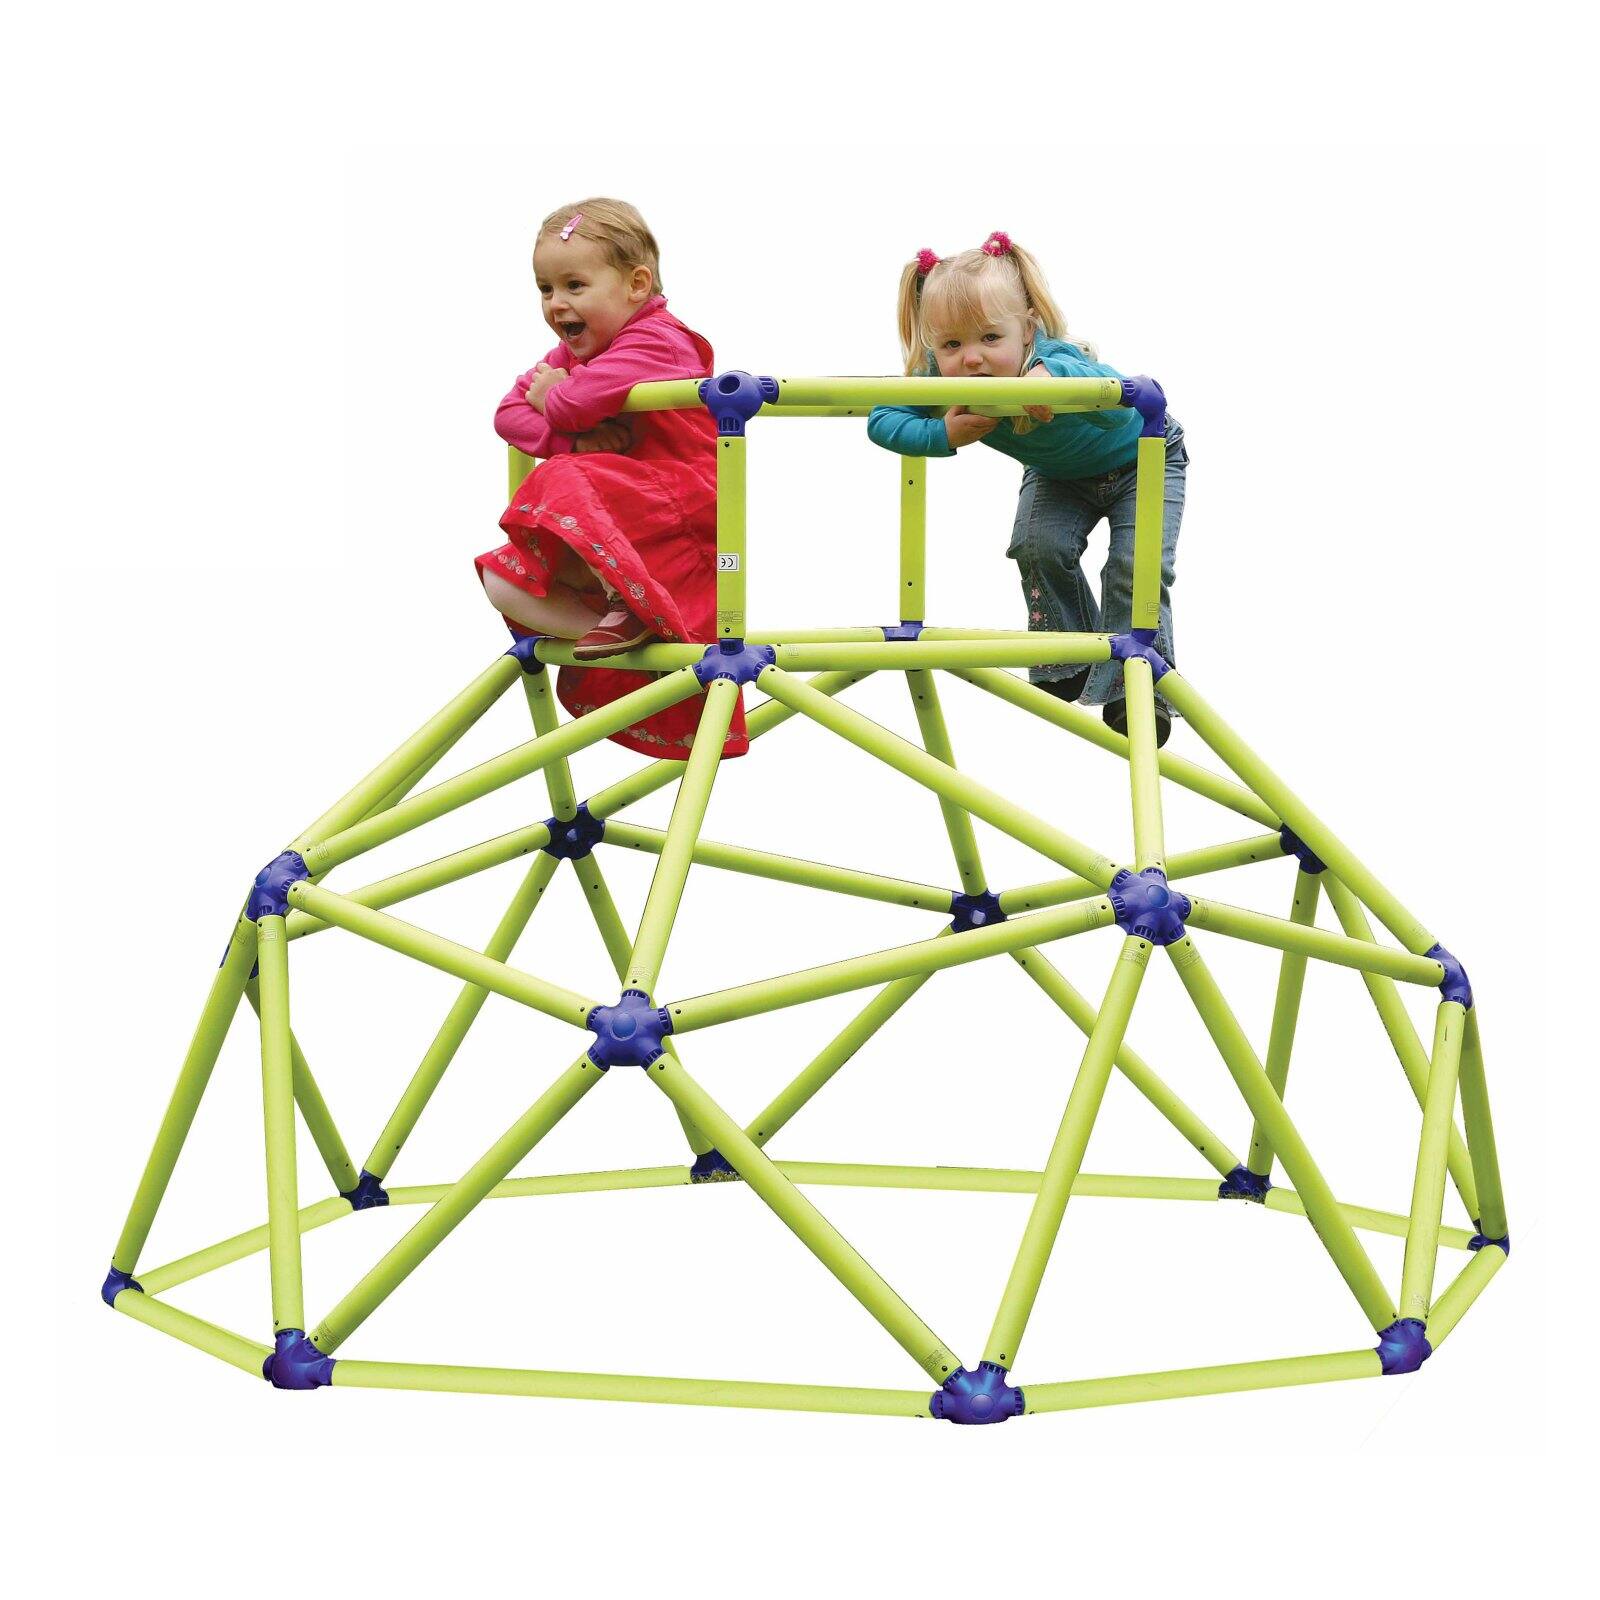 Eezy Peezy Monkey Bars Climbing Tower - Active Outdoor Fun for Kids Ages 3 to 8 Years Old, Green/Blue - image 2 of 3